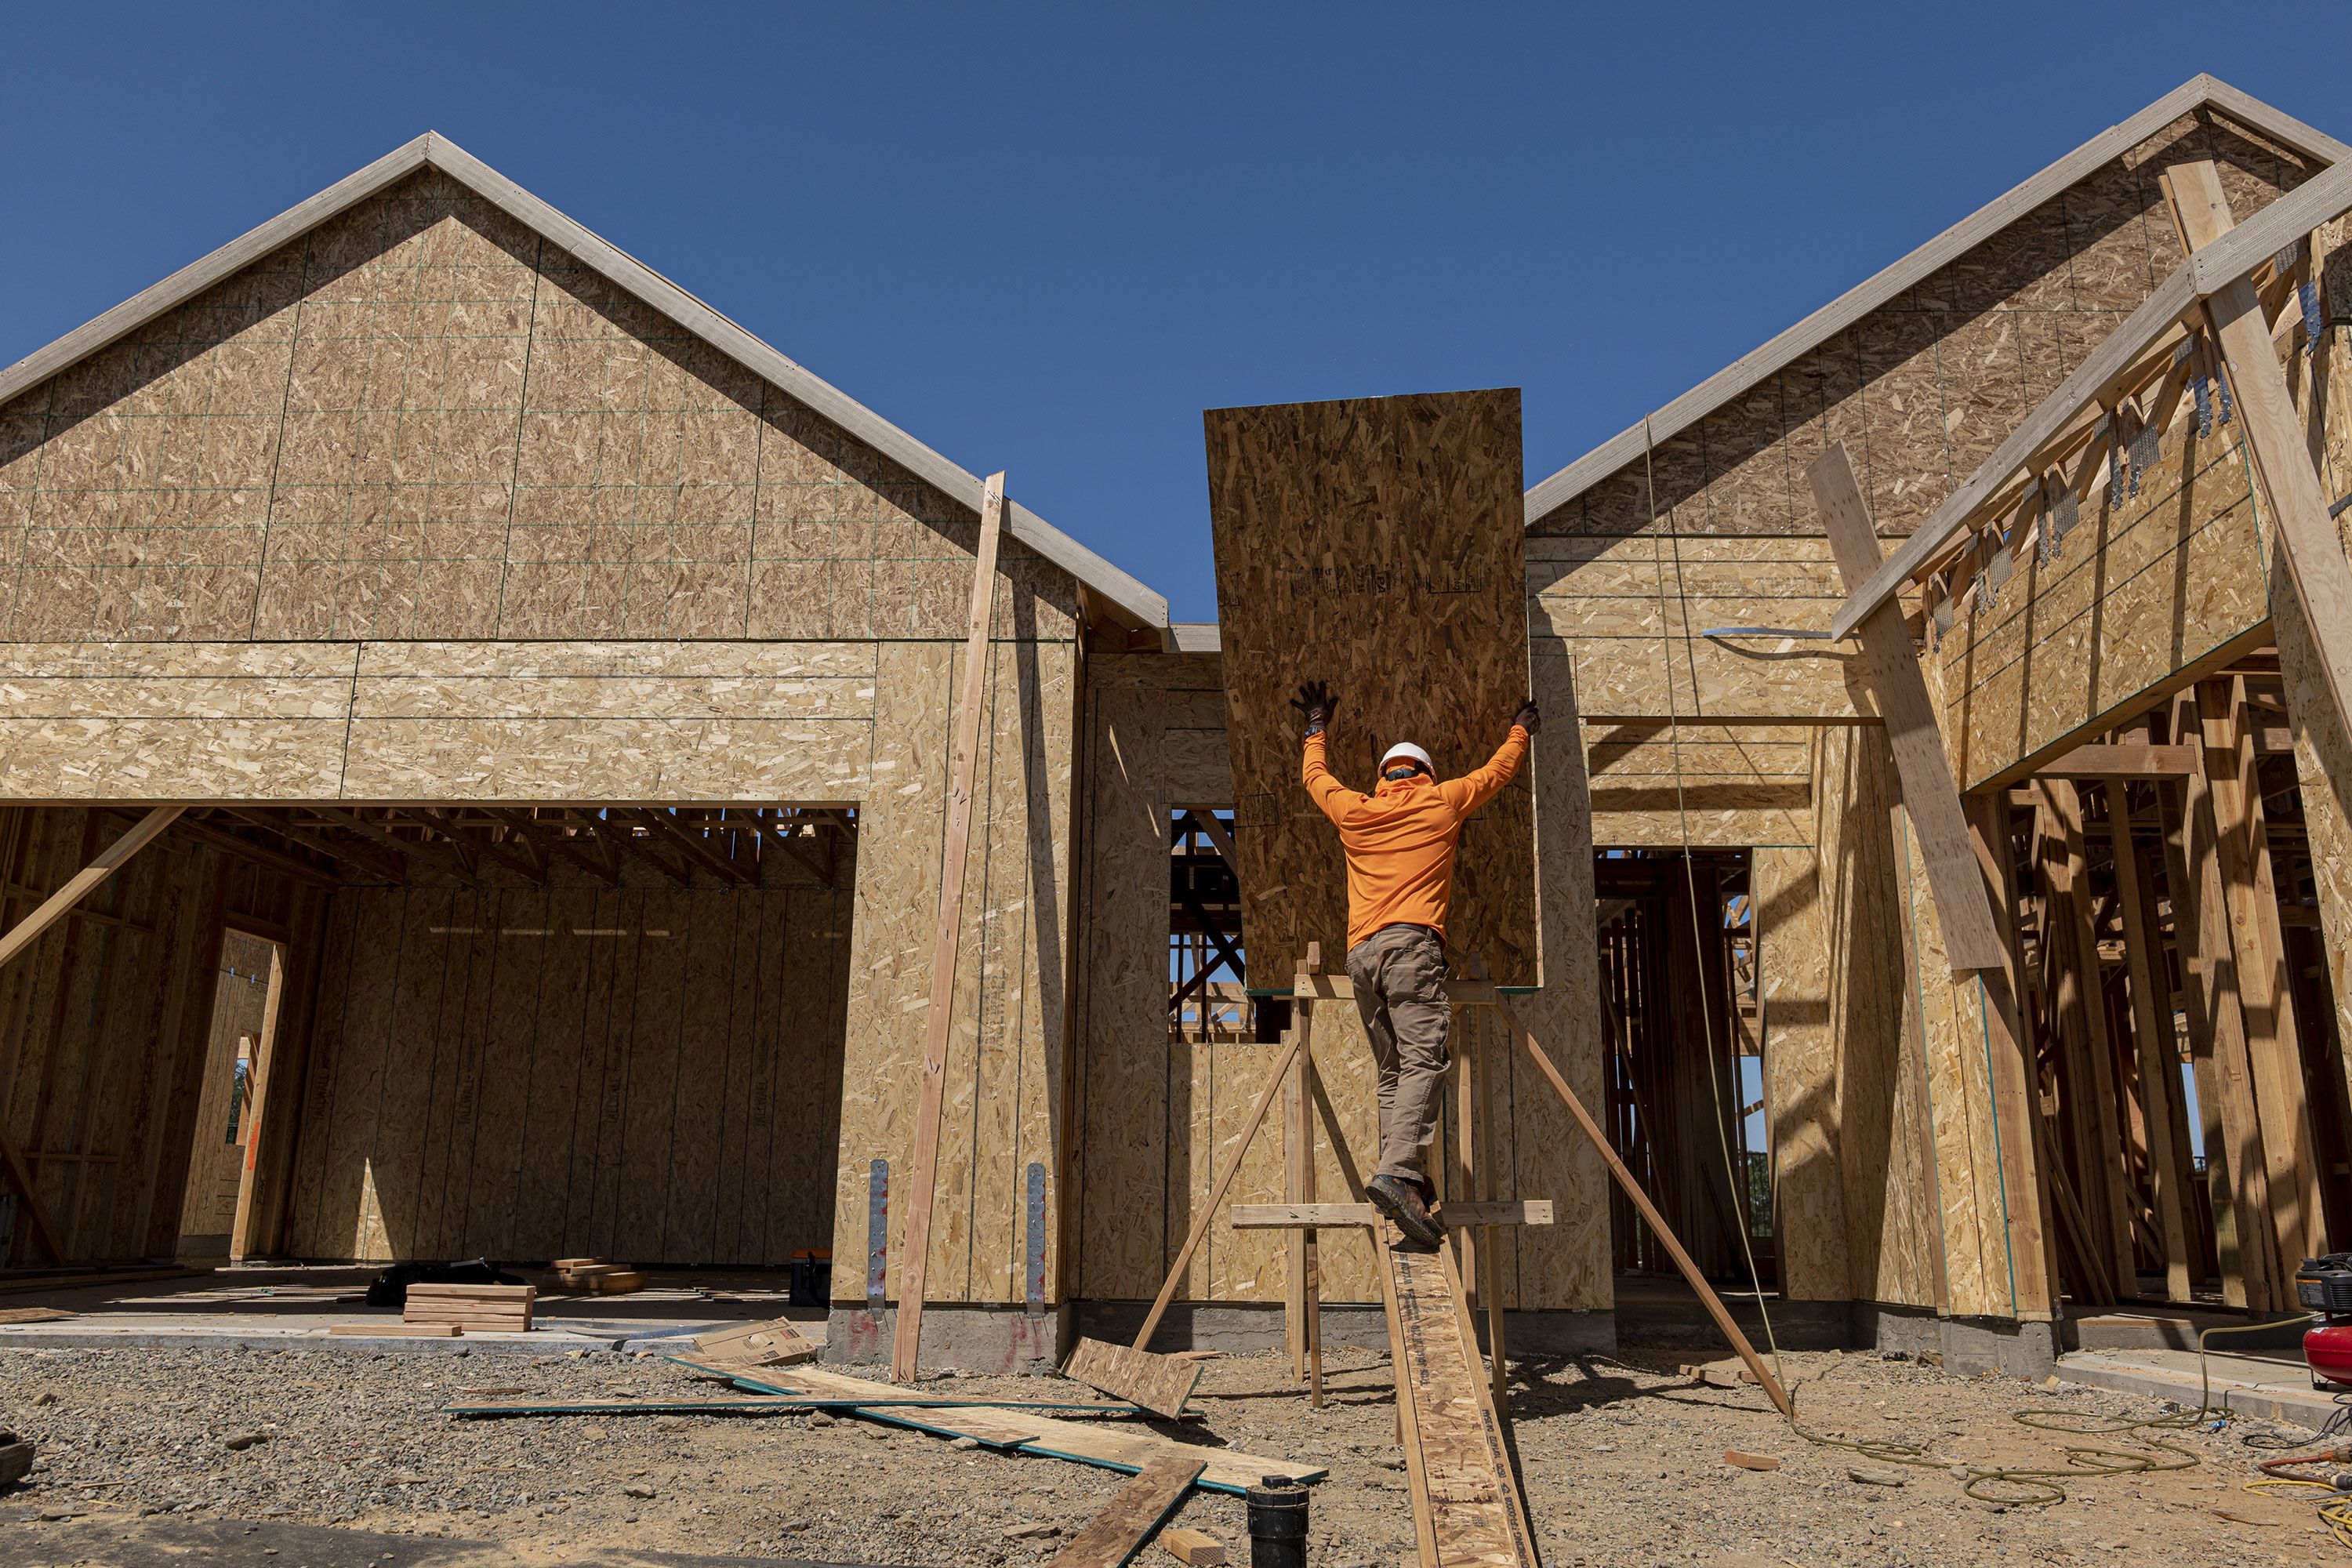 US Construction Reaches All-Time High in May